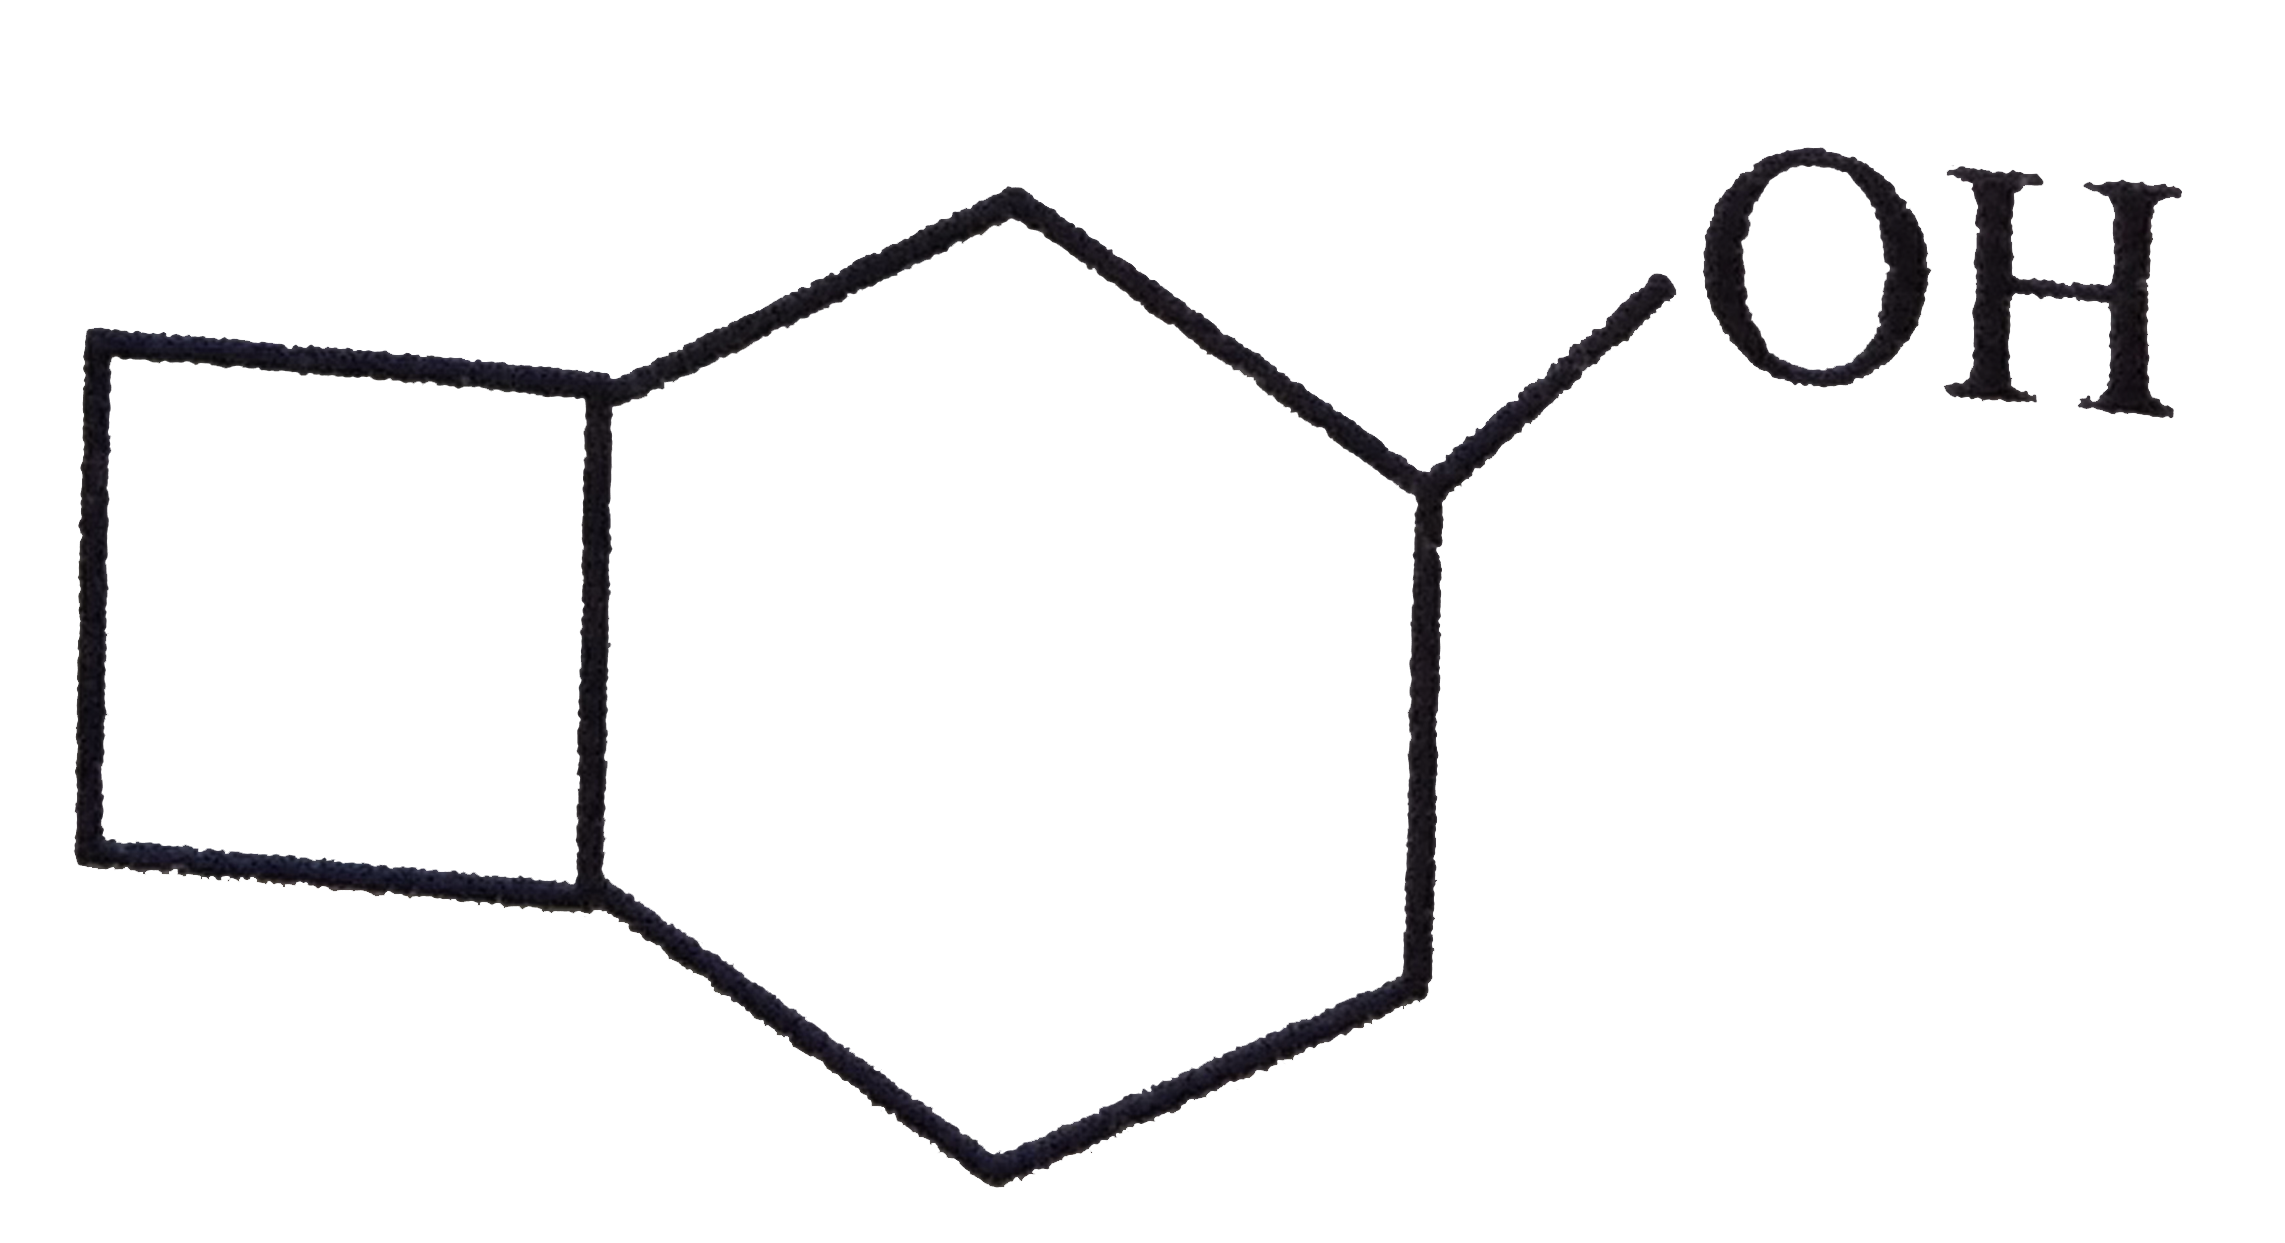 The IUPAC name of the compound